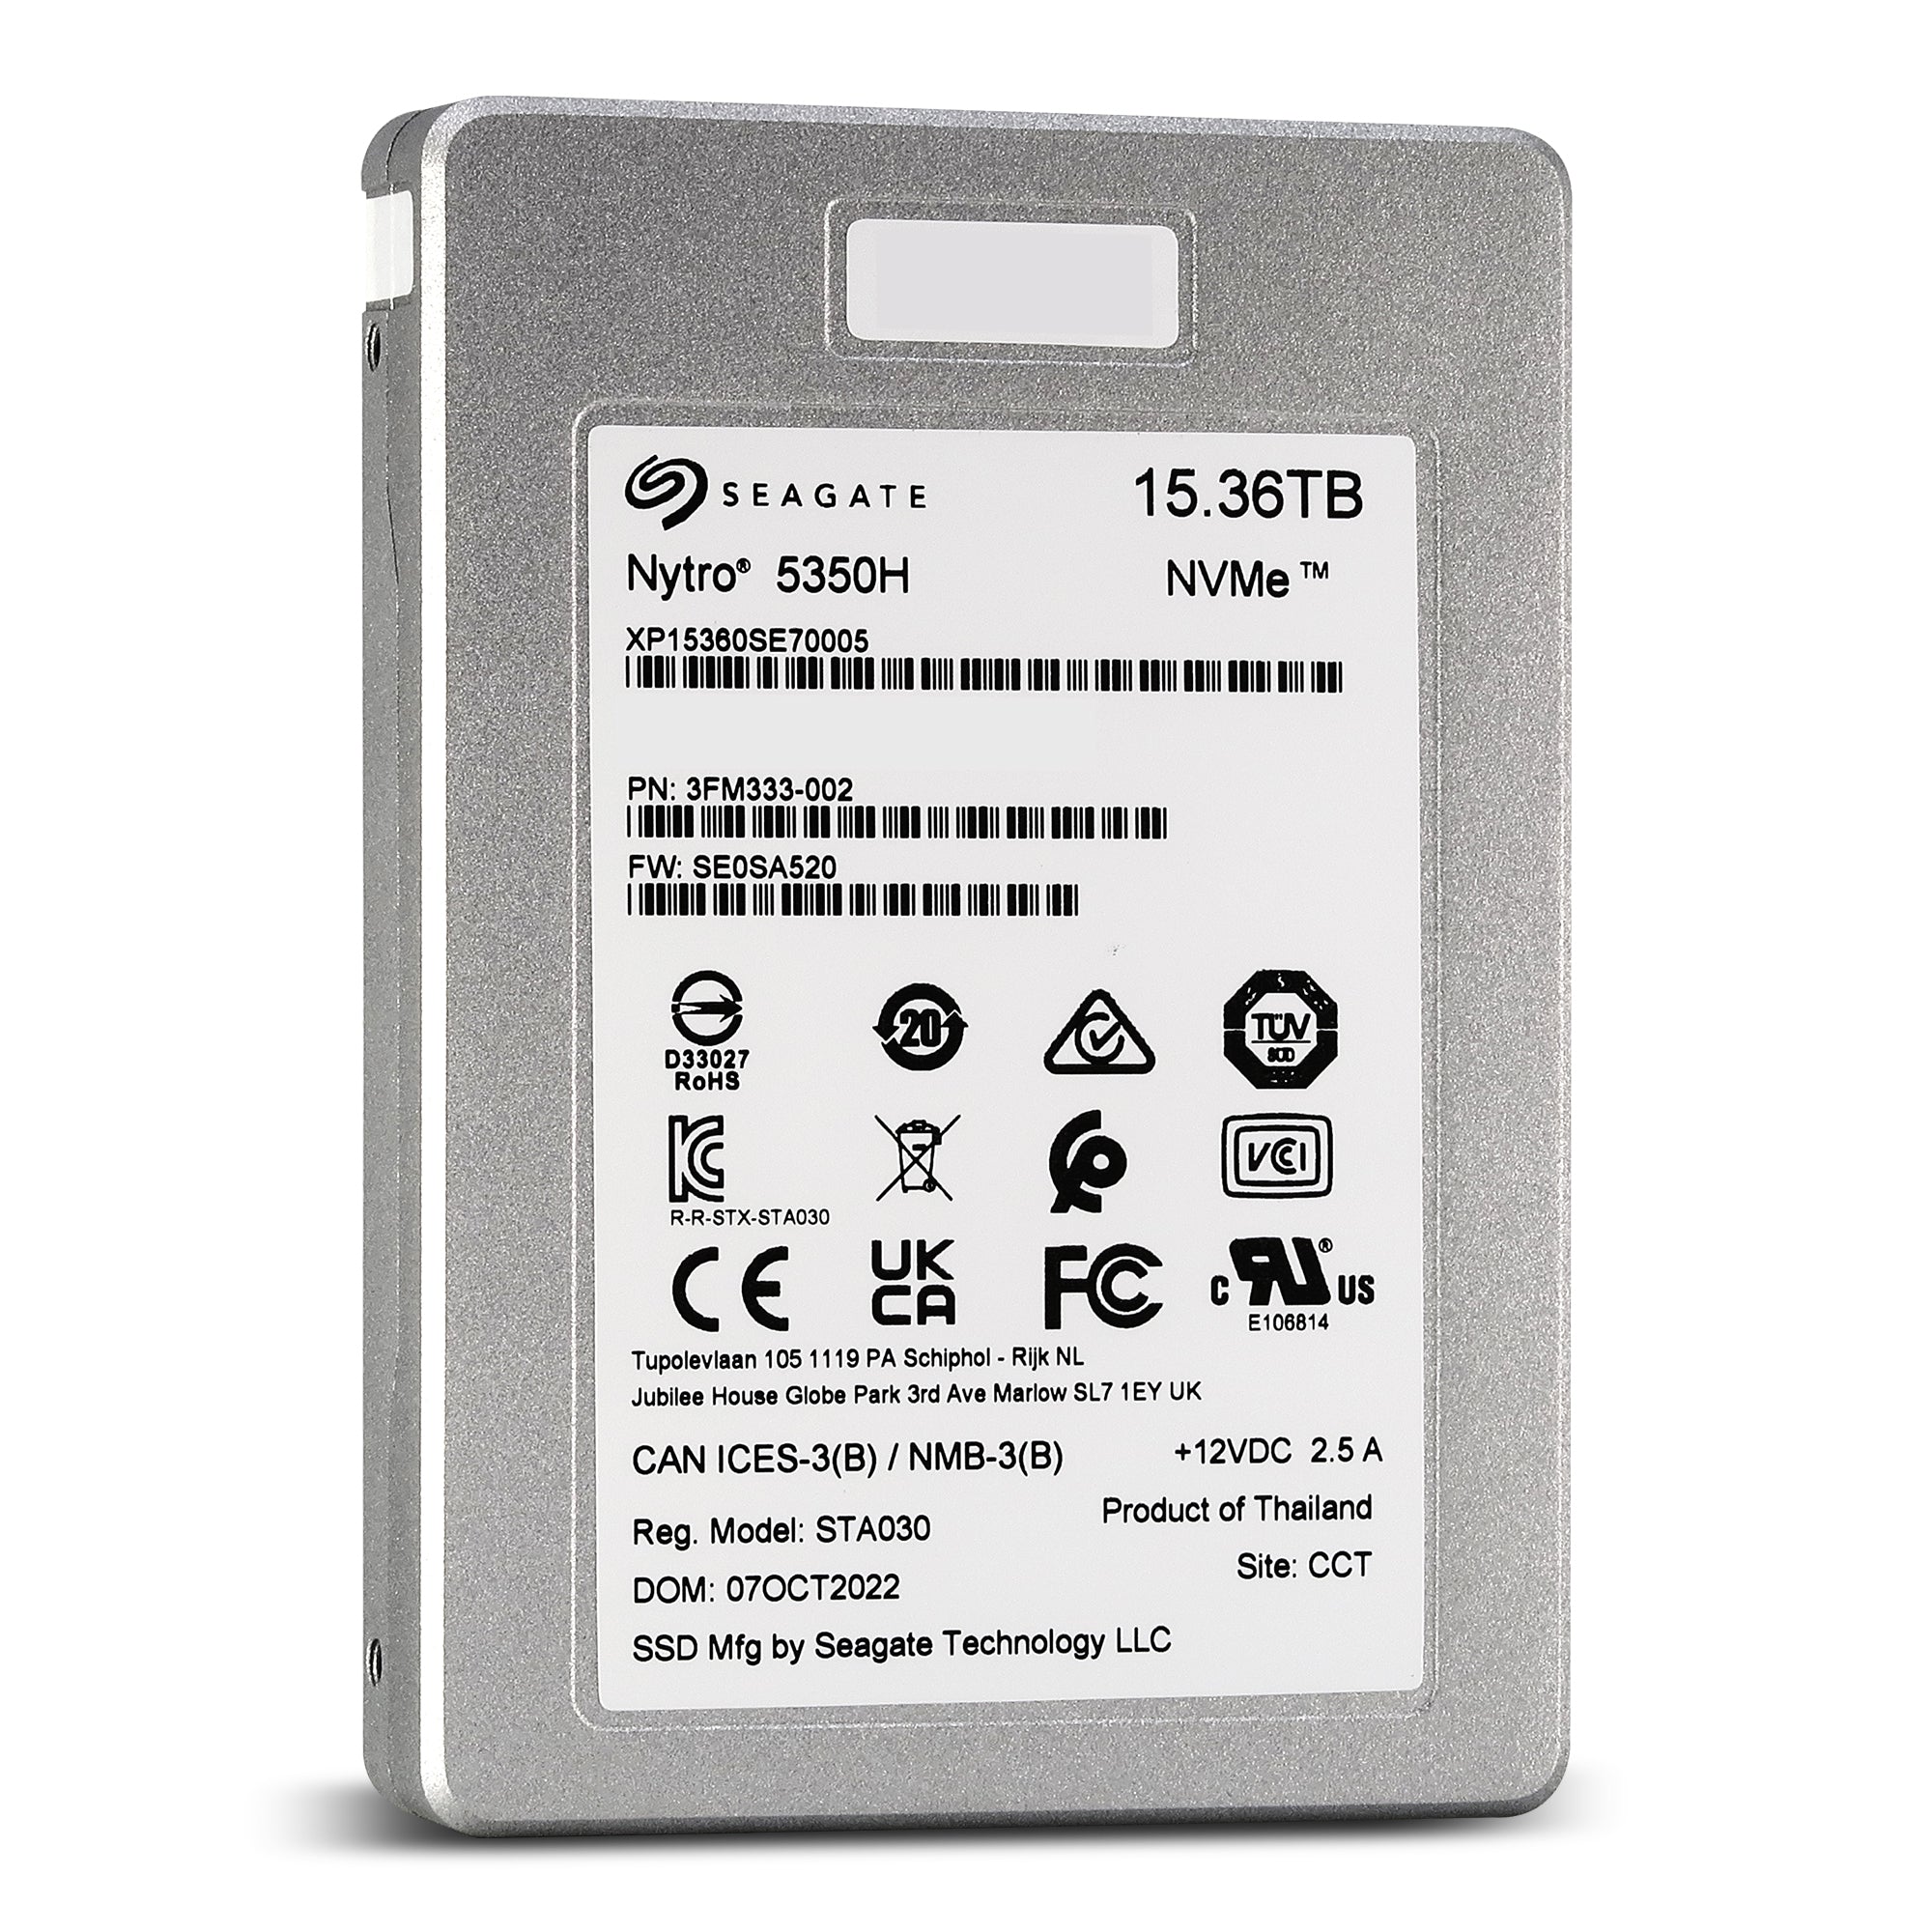 Seagate Nytro 5350H XP15360SE70005 3FM333-002 15.36TB PCIe Gen 4.0 x4 8GB/s 3D eTLC U.2 NVMe 2.5in Solid State Drive - Front View